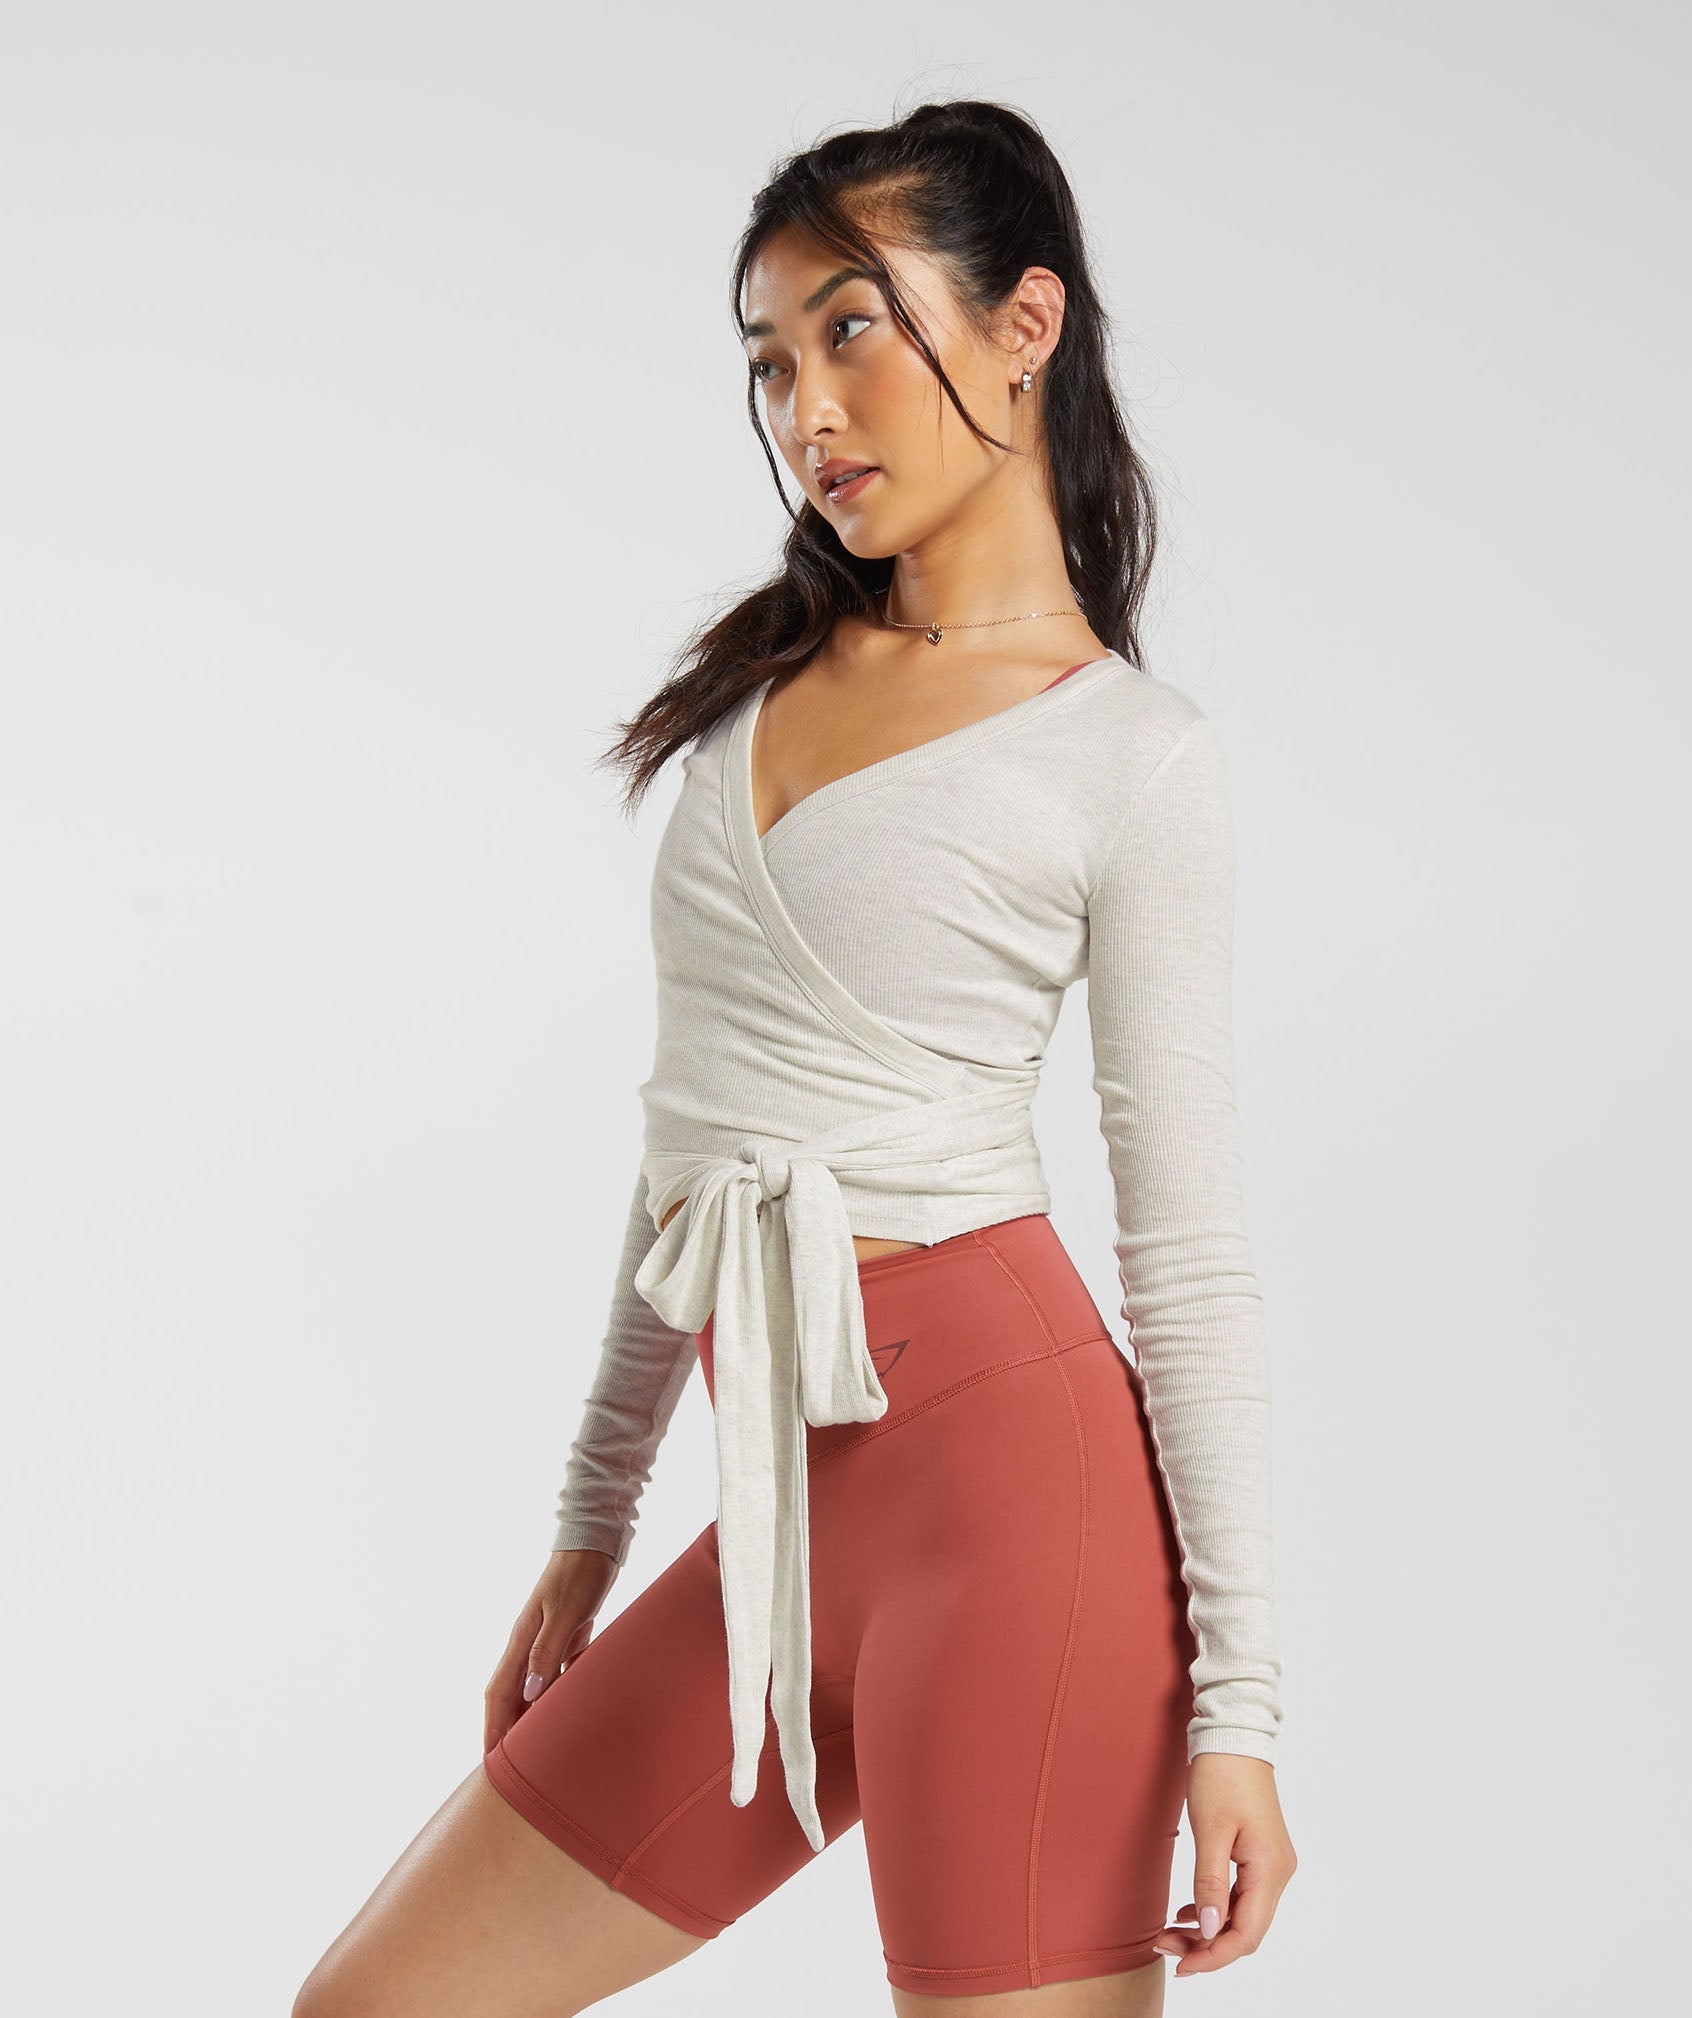 Elevate Wrap Long Sleeve Top in Frost White Marl - view 3